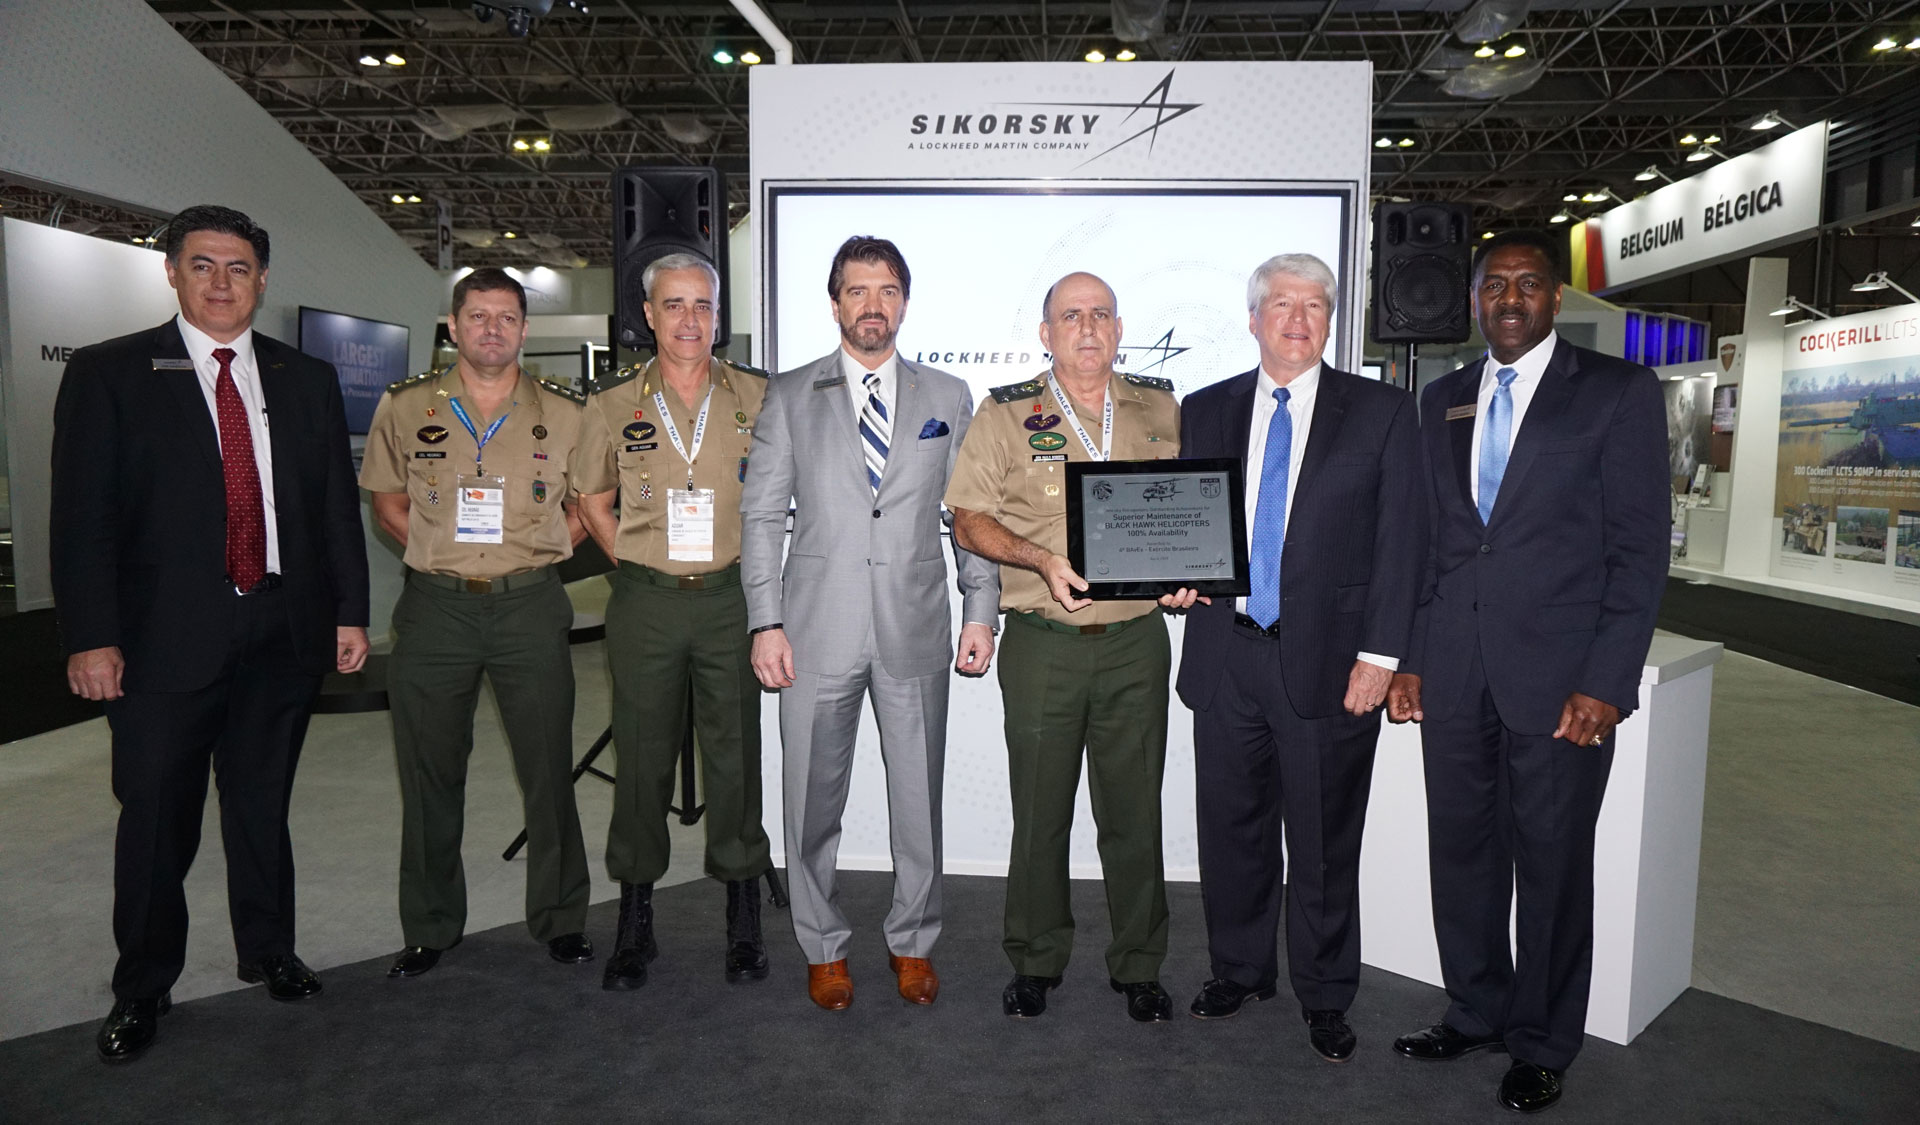 Brazilian Navy squadron HS-1 was honored by Sikorsky with a commemorative plaque for one of its most challenging rescue efforts to date – an at-sea, nighttime rescue off the coast of Cabo Frio, Brazil, in August 2016. The rescue team searched tirelessly for 36 hours until they found the three survivors of the capsized boat, who had been in the water without food or drink. The squadron executed the hair-raising rescue flawlessly, bringing all three occupants to safety. Their efforts were so impressive that they were recognized in 2017 with the American Helicopter Society International’s prestigious Kossler prize. The event also marked the first true night rescue for the HS-1 squadron using a SEAHAWK®. Rear Adm. Montenegro, commander of Brazil’s Naval Air Force, said: “We are very honored and flattered with Sikorsky’s recognition. This rescue is a proof of the crew training excellency and the aircraft’s efficiency. We thank Sikorsky for the partnership in maintaining and operating this capable helicopter.”